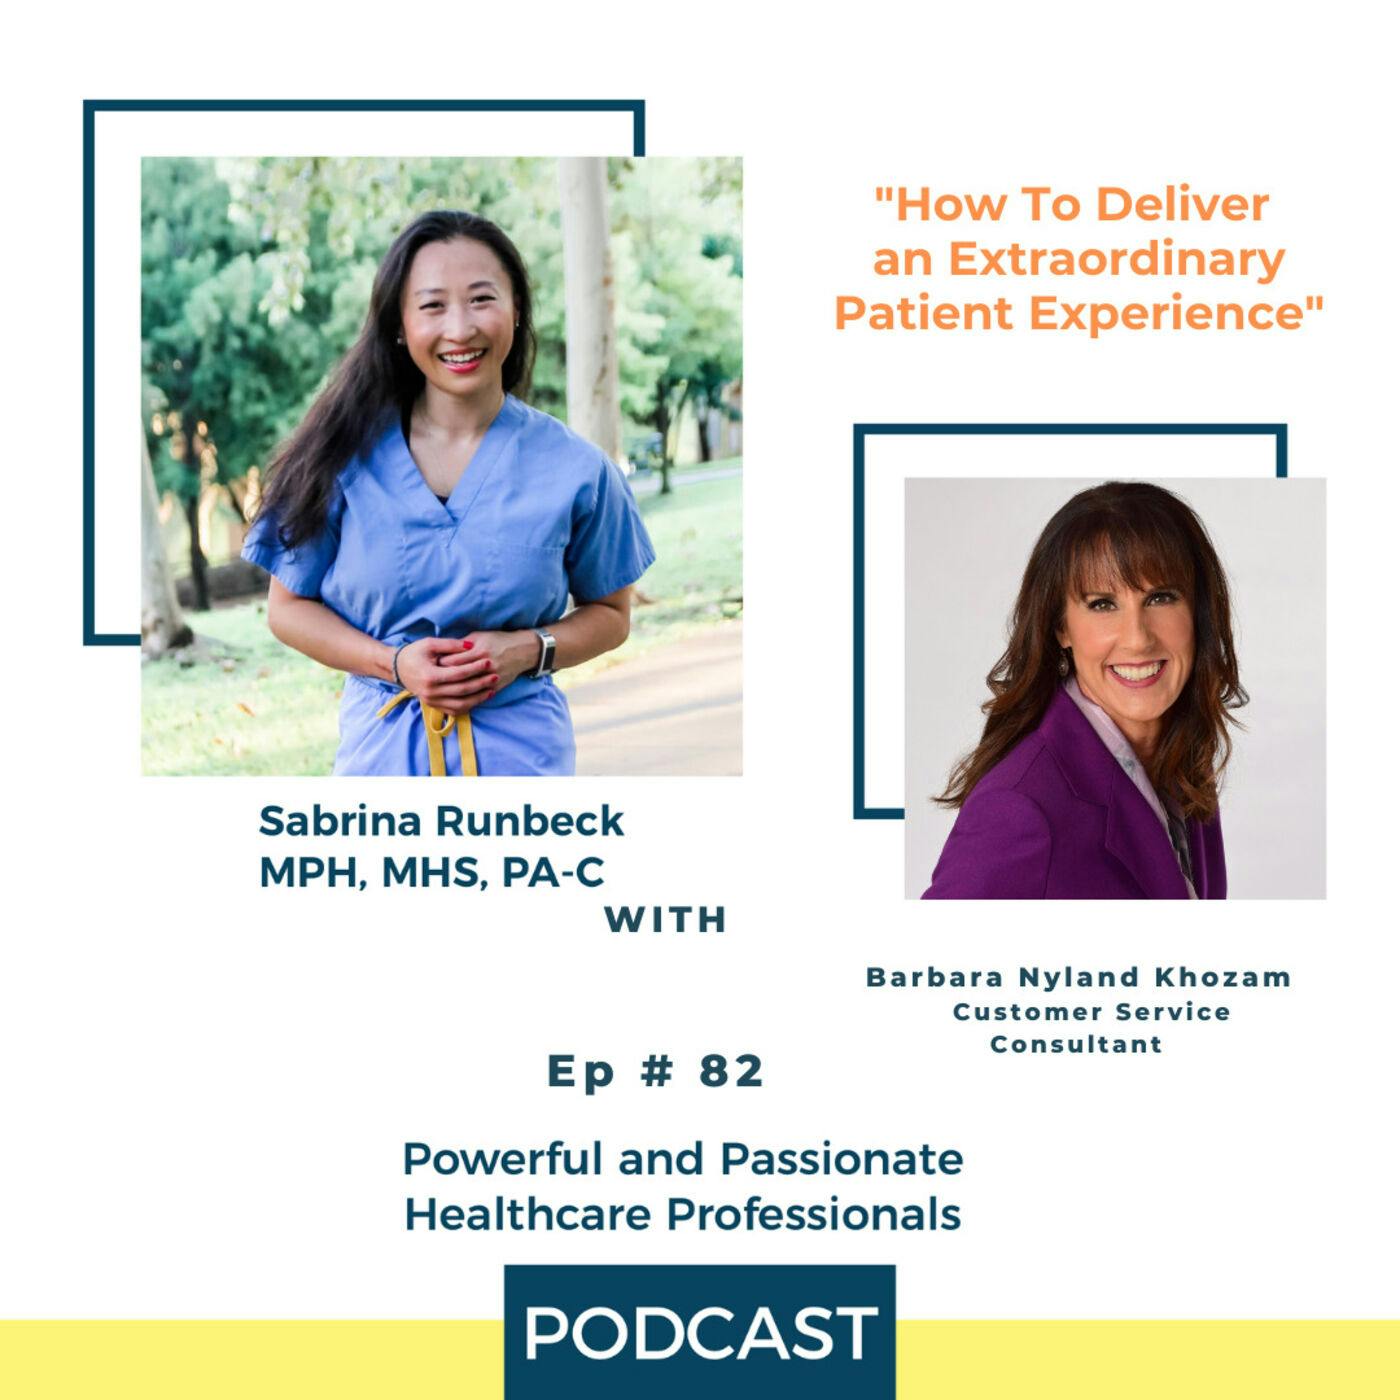 Ep 82 – How To Deliver an Extraordinary Patient Experience with Barbara Nyland Khozam